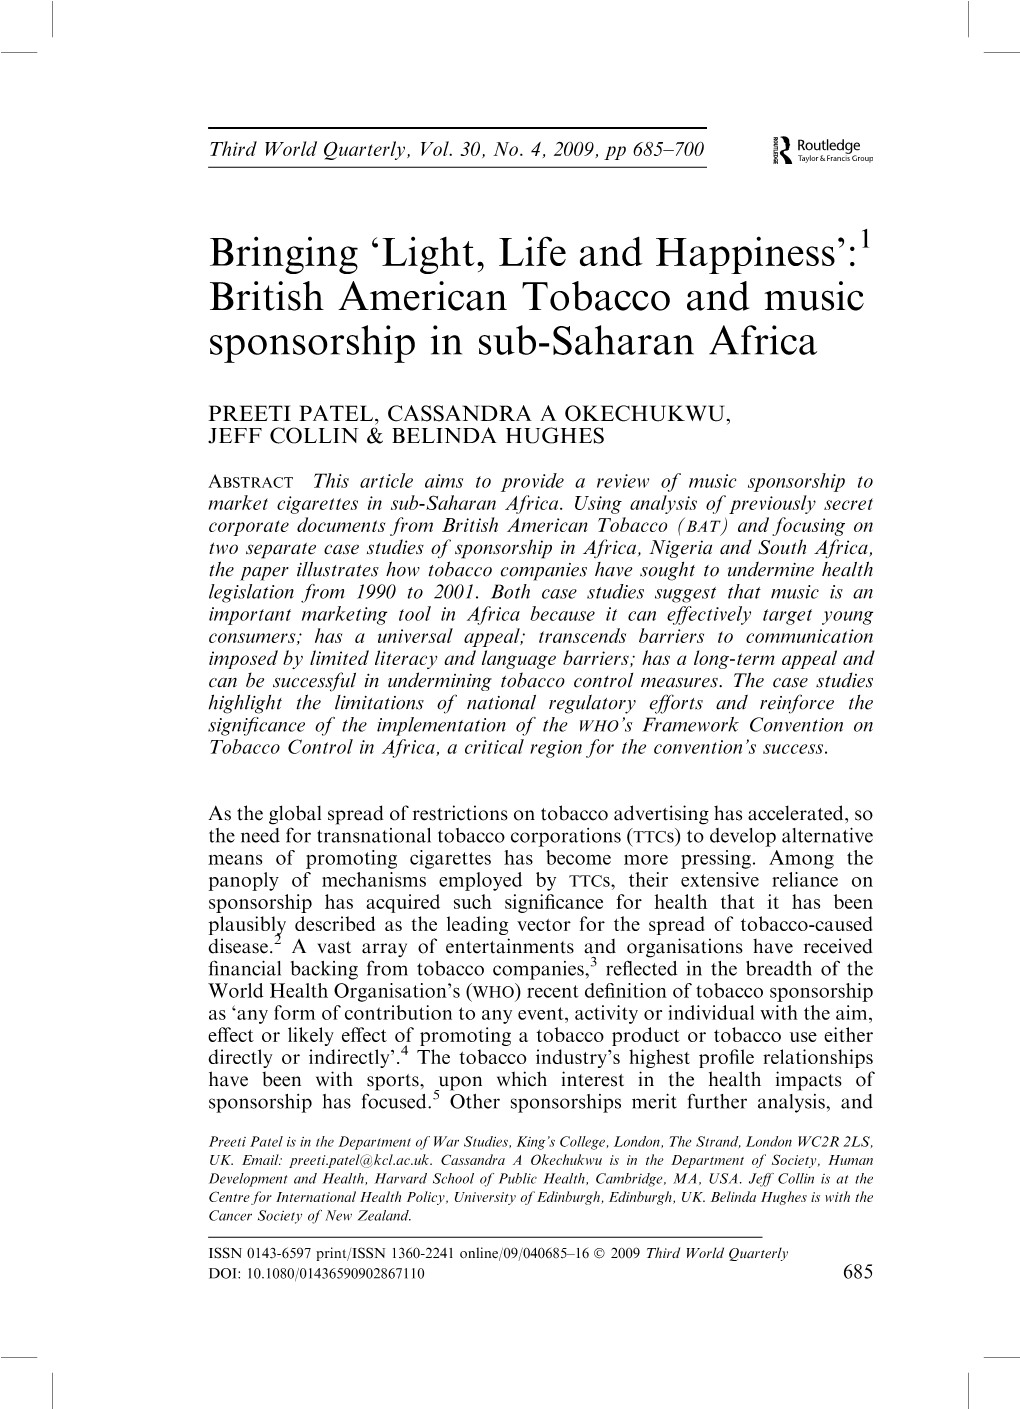 'Light, Life and Happiness': British American Tobacco and Music